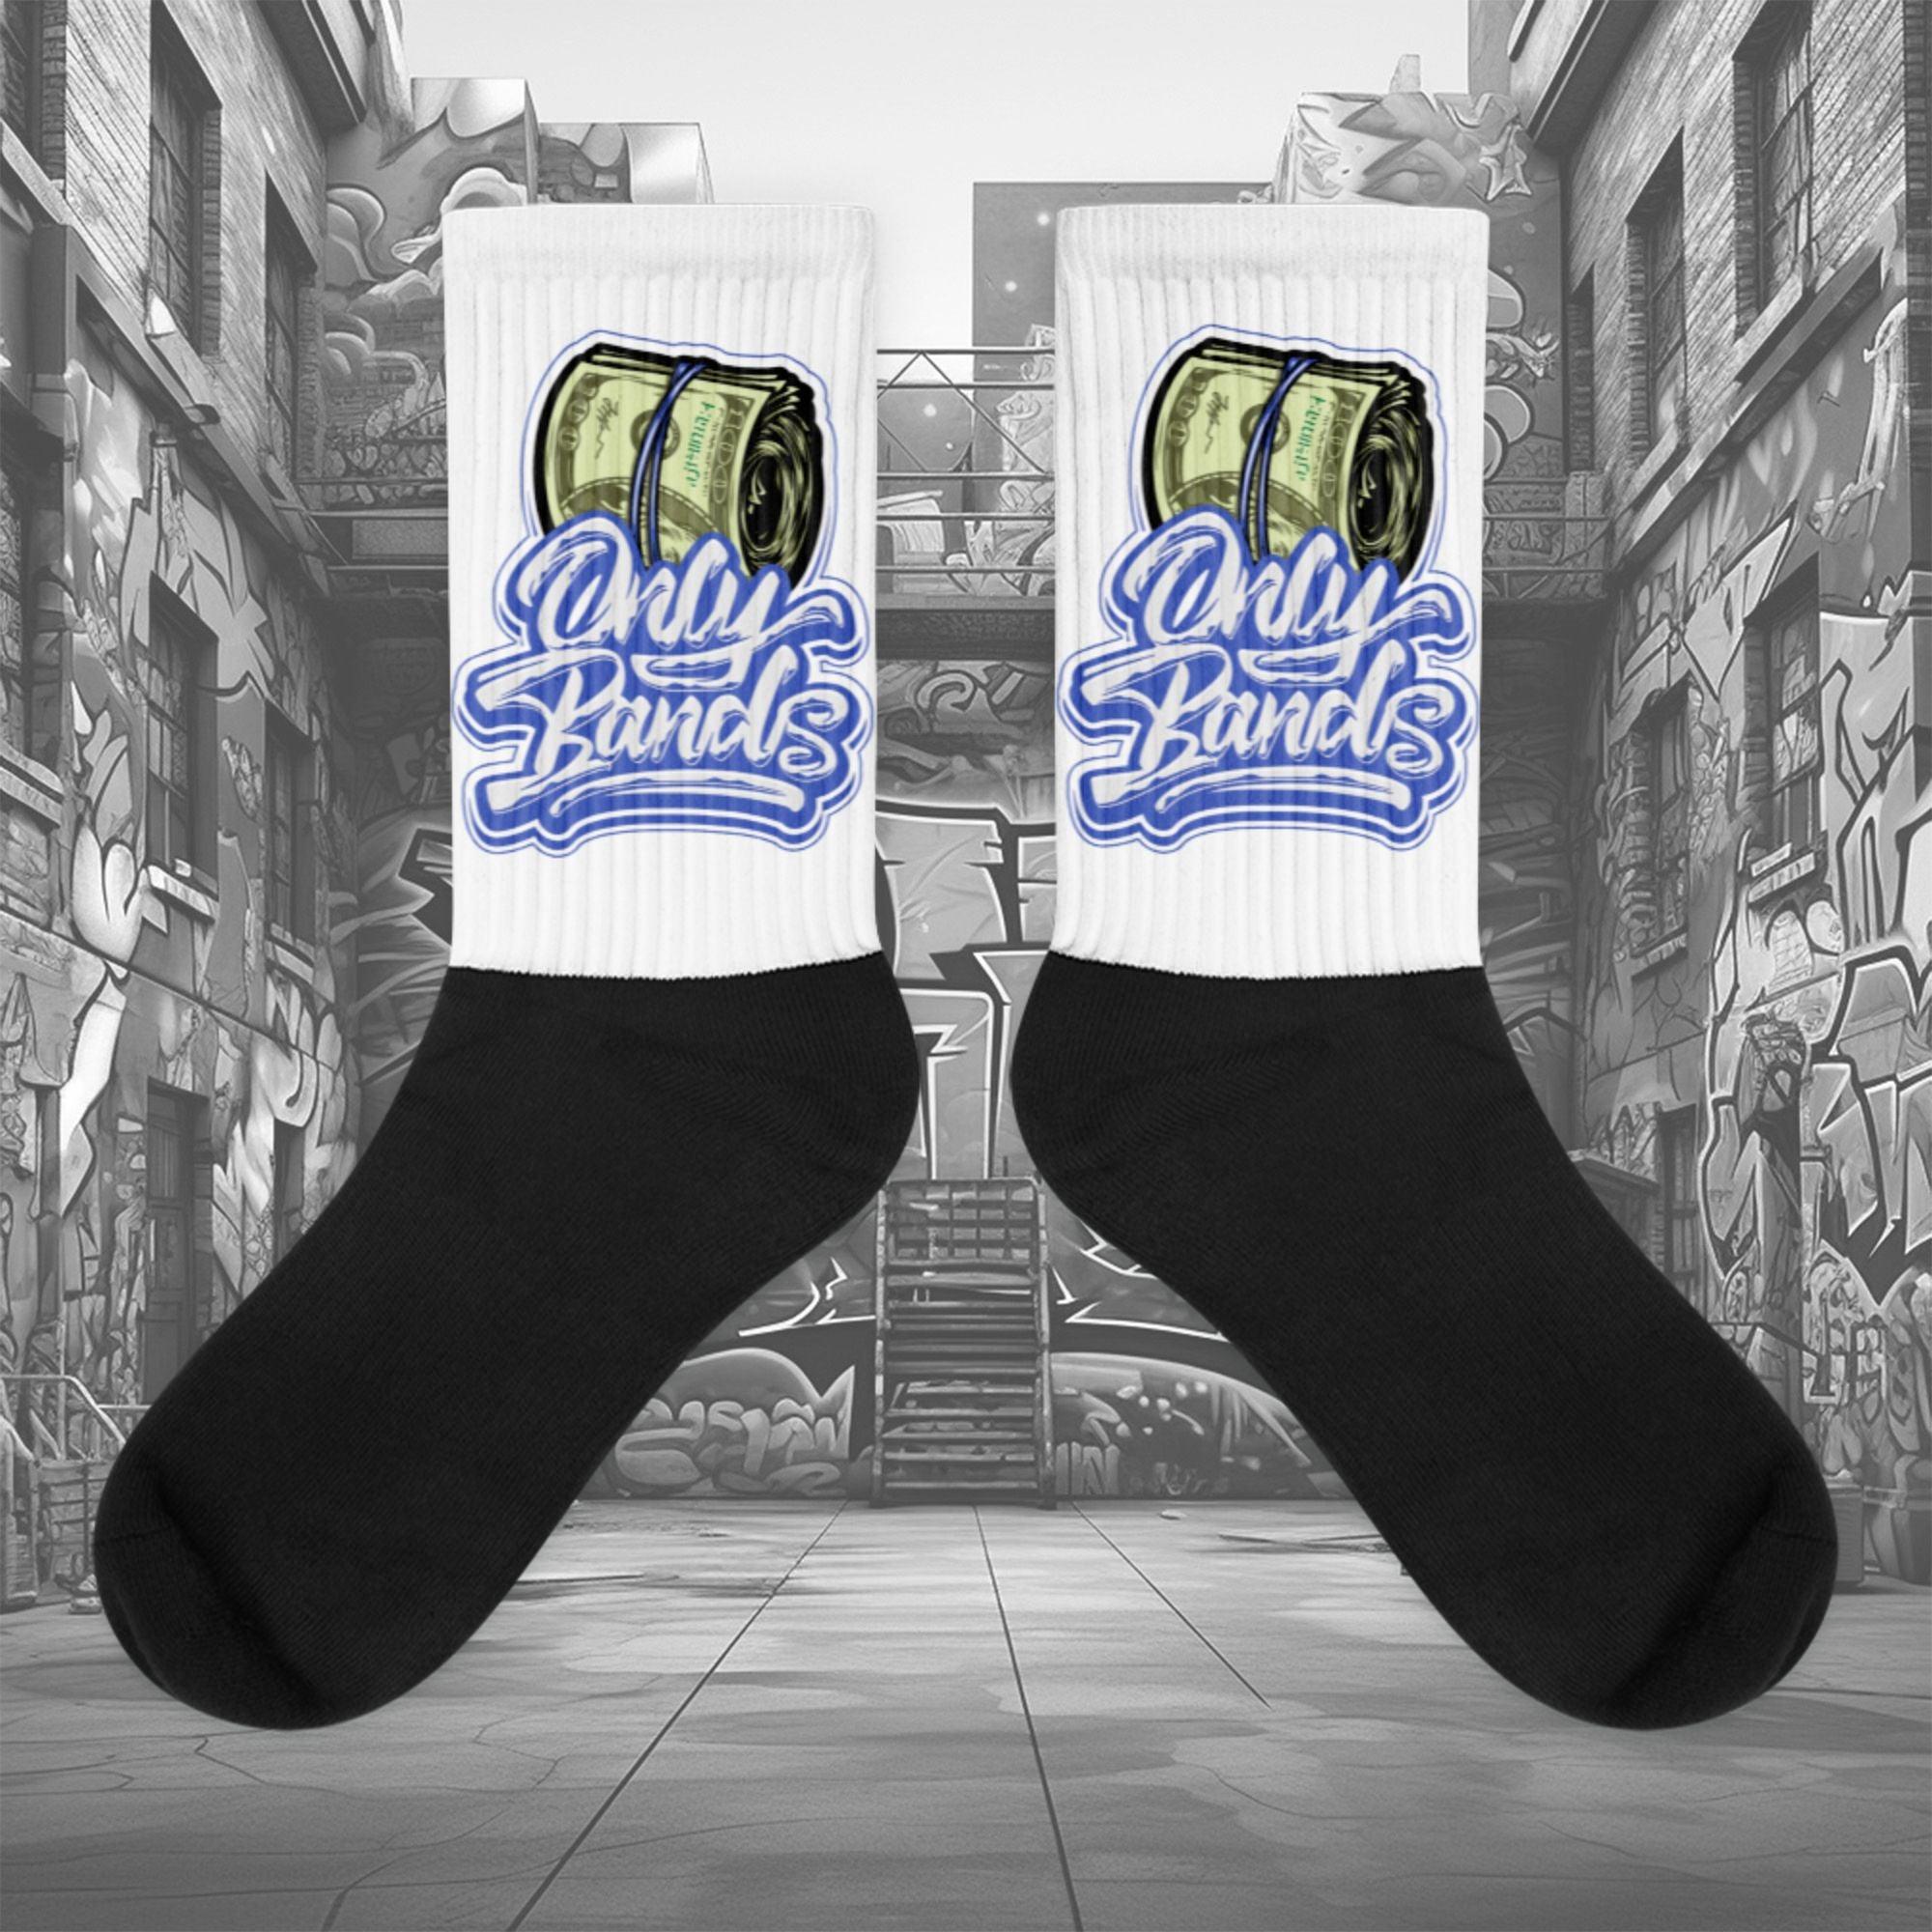  Showcases the view of the socks, highlighting the vibrant ' MEDUSA ' design, which perfectly complements the Nike Dunk Disrupt 2 Hyper Royal sneakers. The intricate pattern and color scheme inspired by the  theme are prominently displayed.  Focusing on the ribbed leg , cusioned bottoms and the snug fit of the socks. This angle provides a clear view of the texture and quality of the material blend.